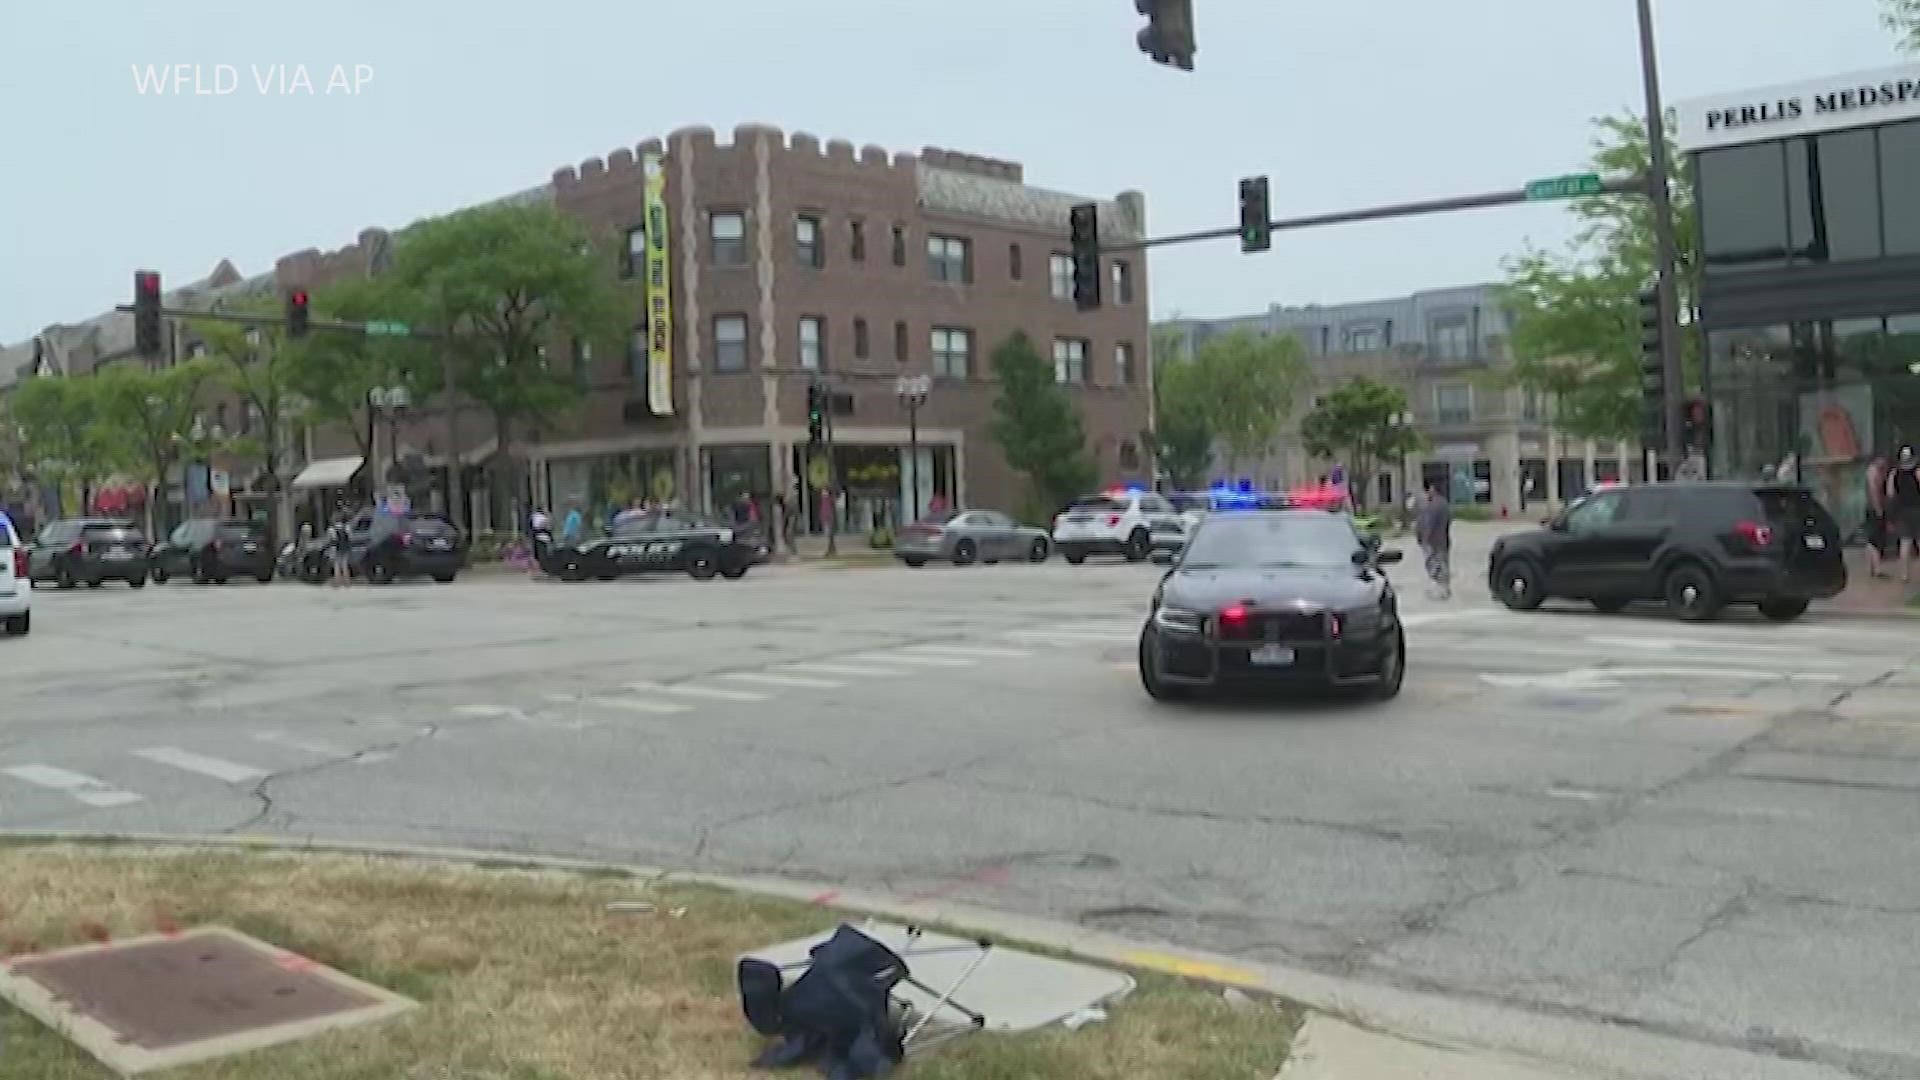 Police say at least six people are dead and 24 were wounded in a shooting at a July Fourth parade in a Chicago suburb. (Video: WFLD via AP)